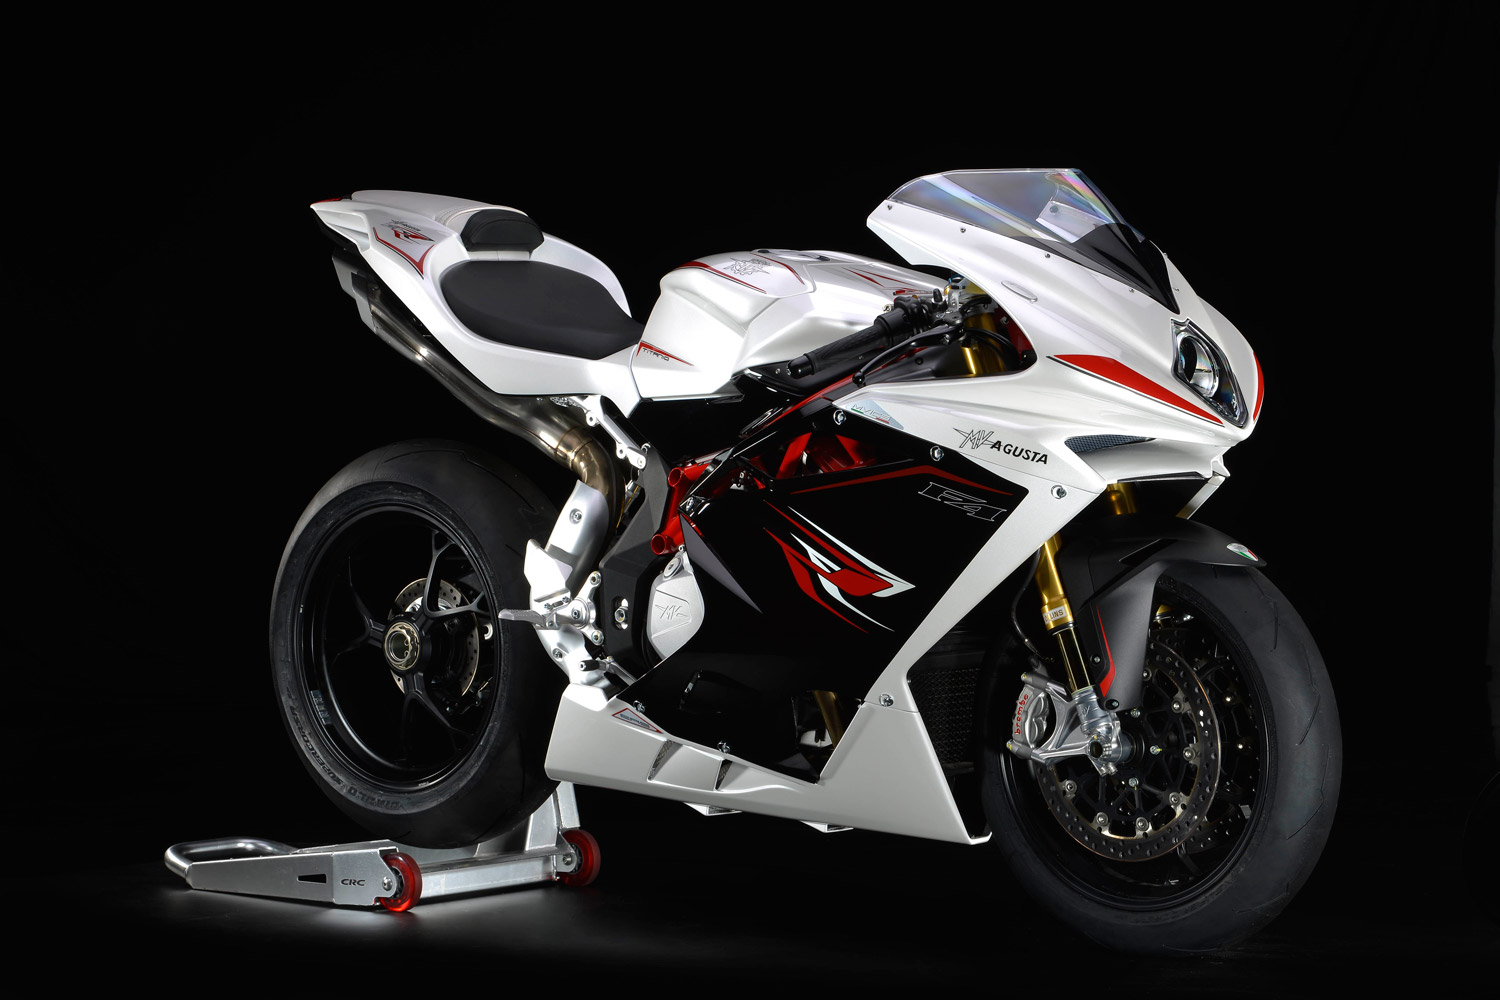 The production version of MV Agusta F4RR